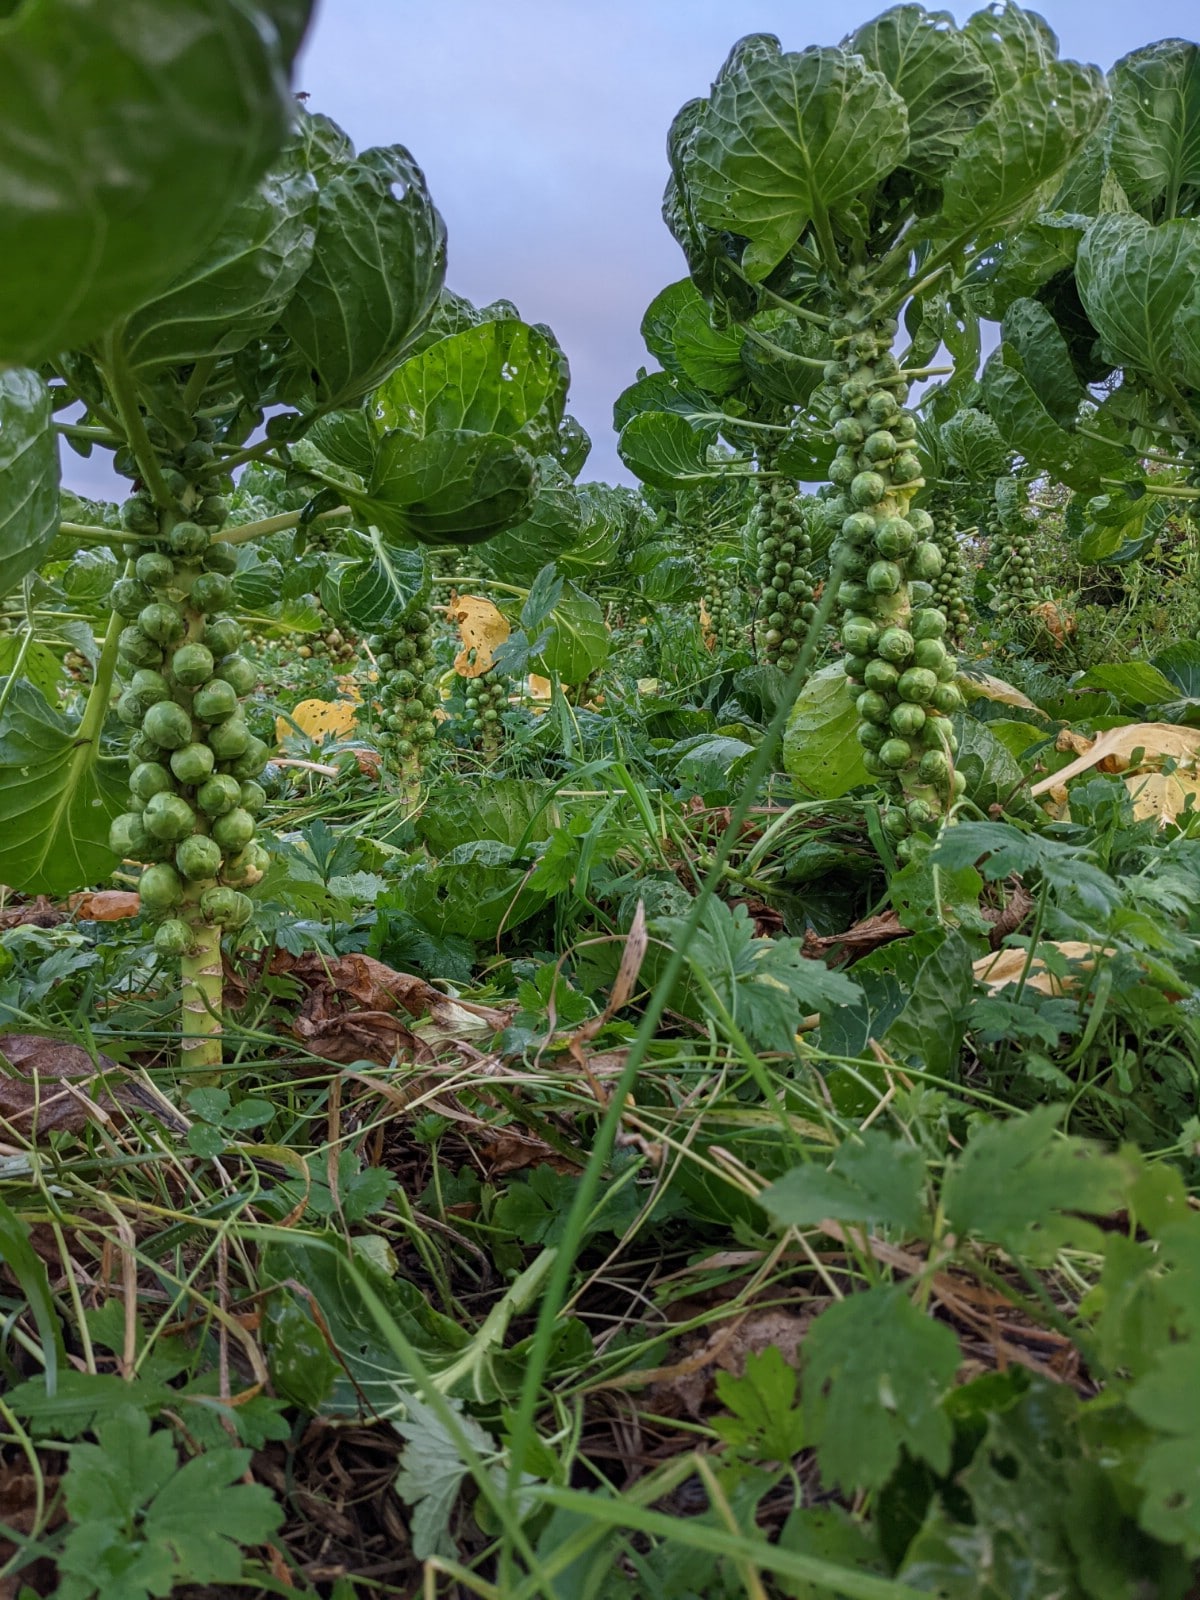 Brussel sprouts ready to harvest.